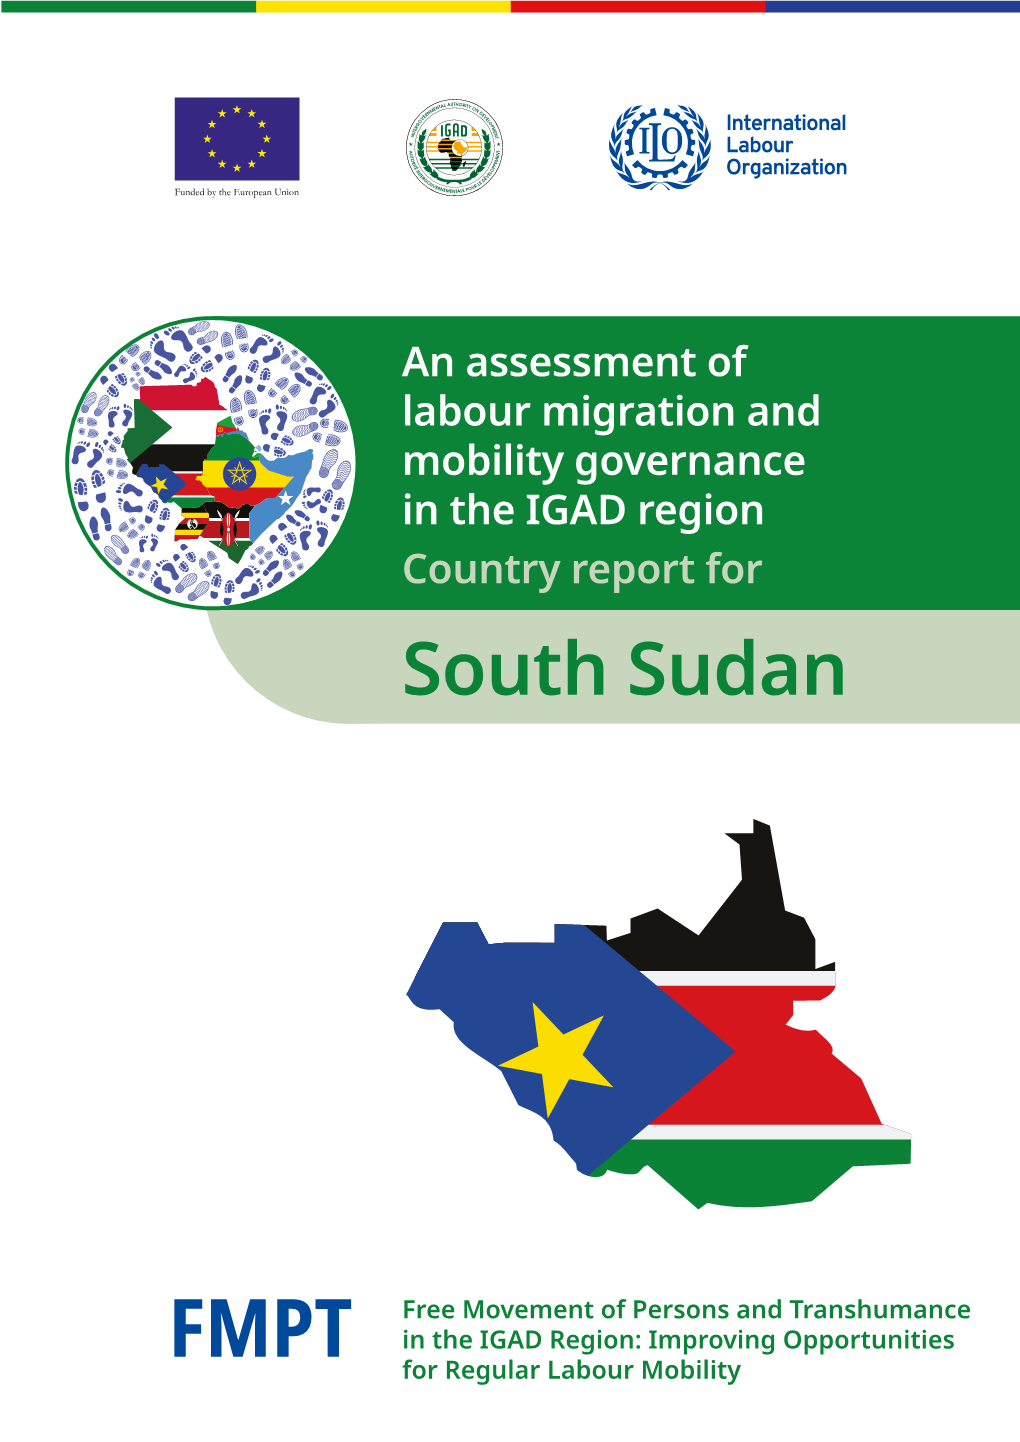 Country Report for South Sudan